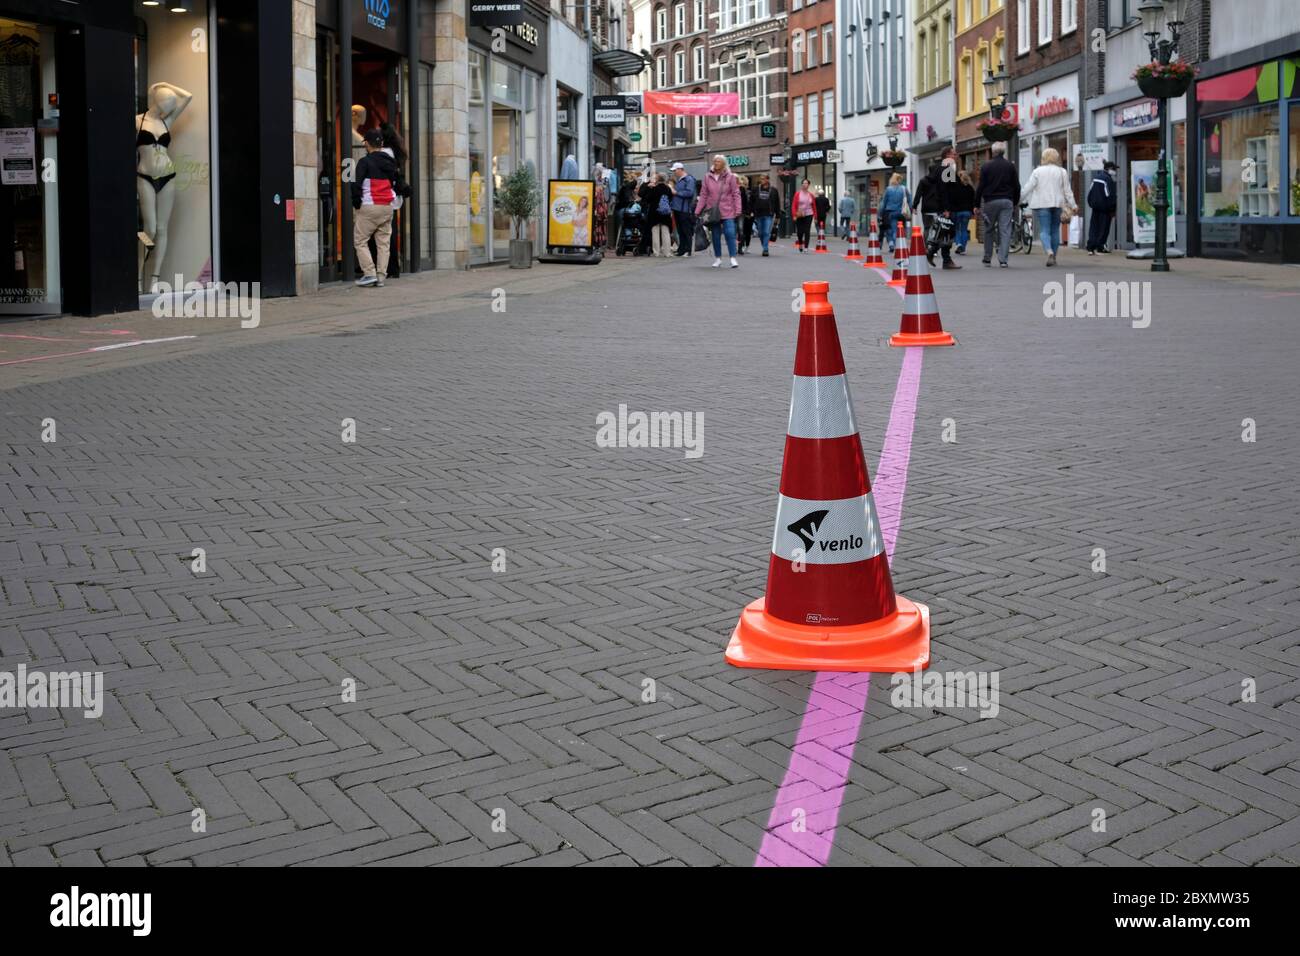 Venlo, Netherlands - 7 June 2020: The pedestrian zone is being divided to enable social distancing in the shopping streets of the city of Venlo. Stock Photo